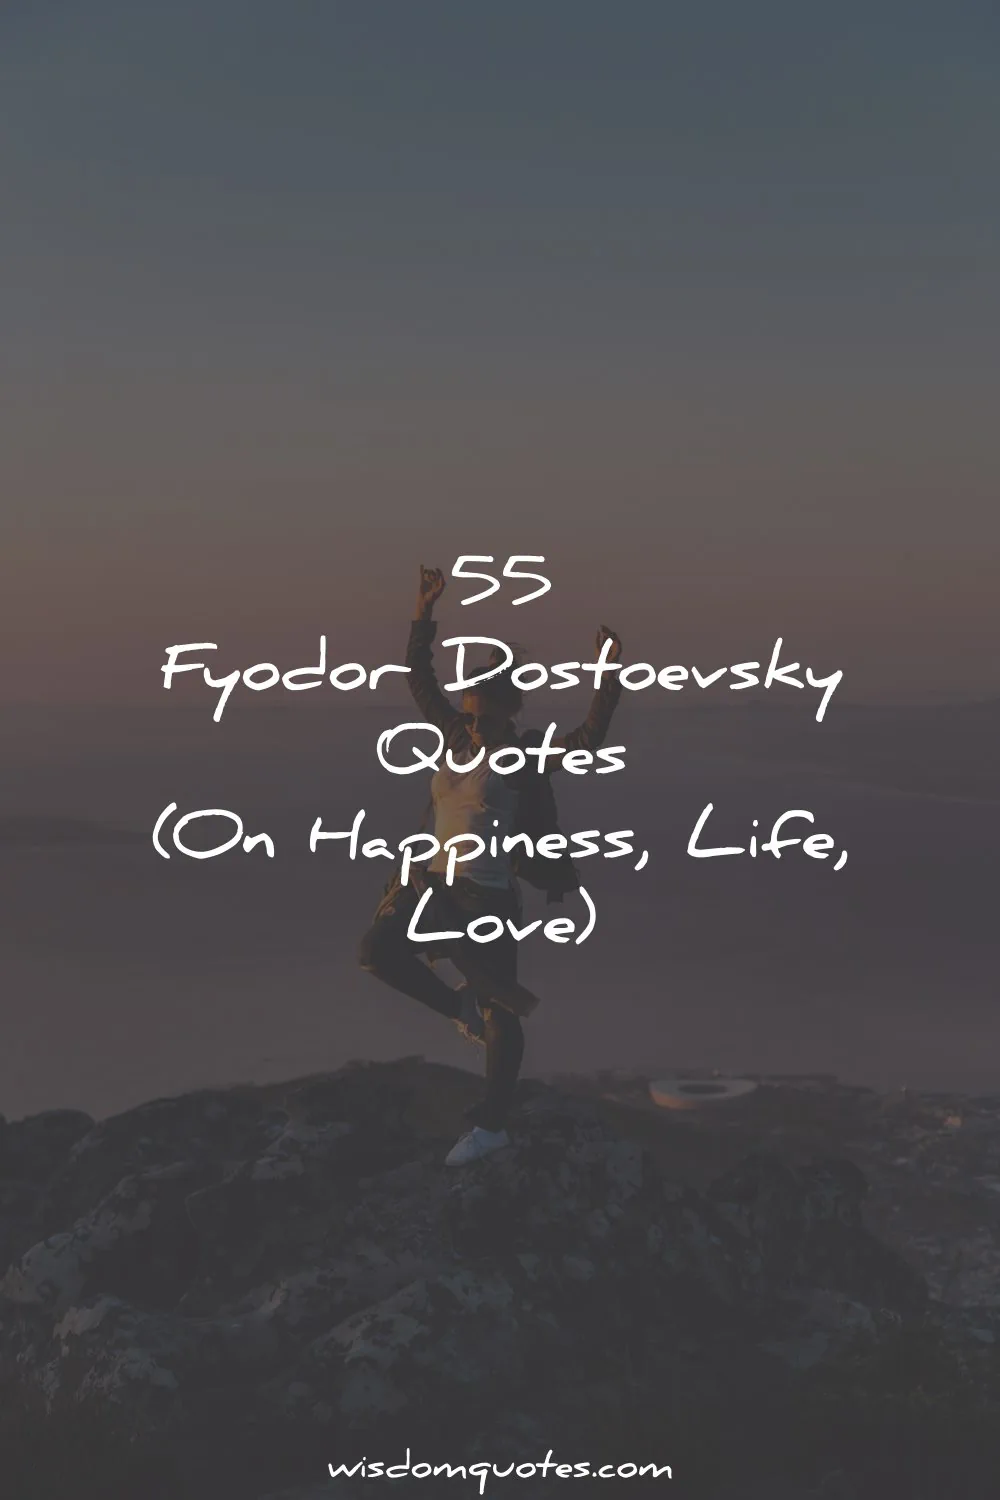 Fyodor Dostoyevsky Quote: “Full freedom will come only when it